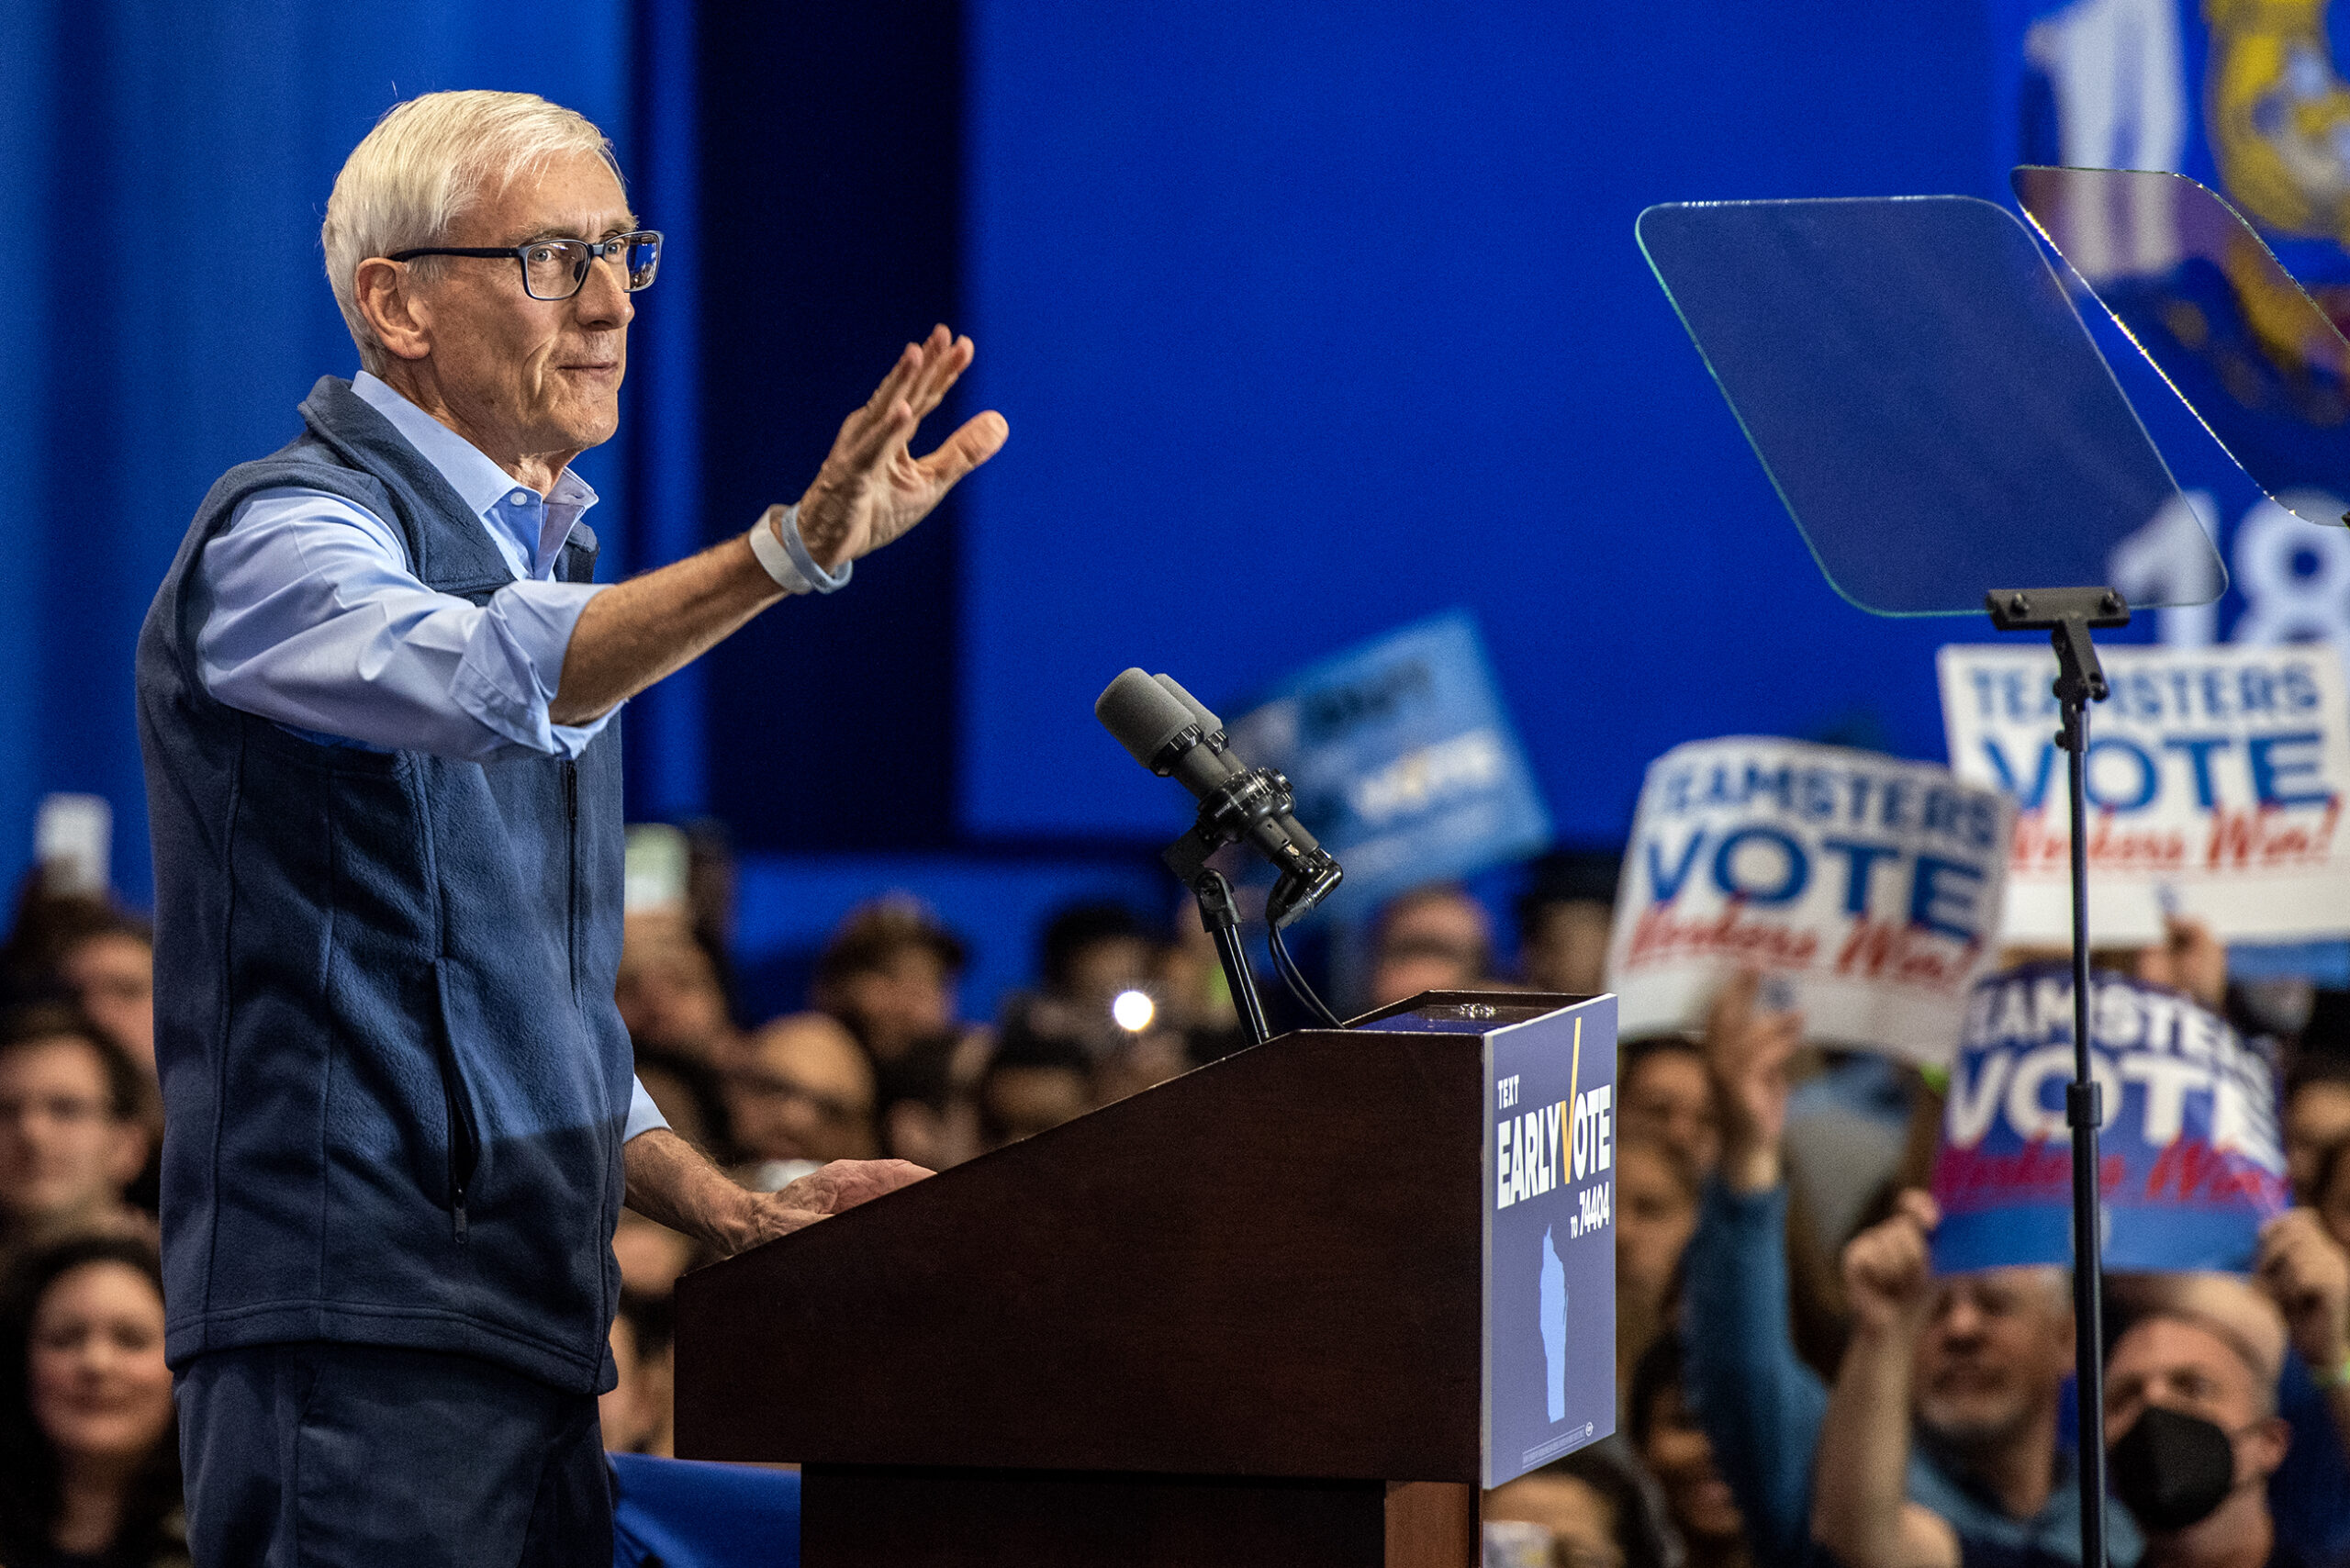 Gov. Tony Evers stands behind a podium and raises his hand to wave at a crowd.